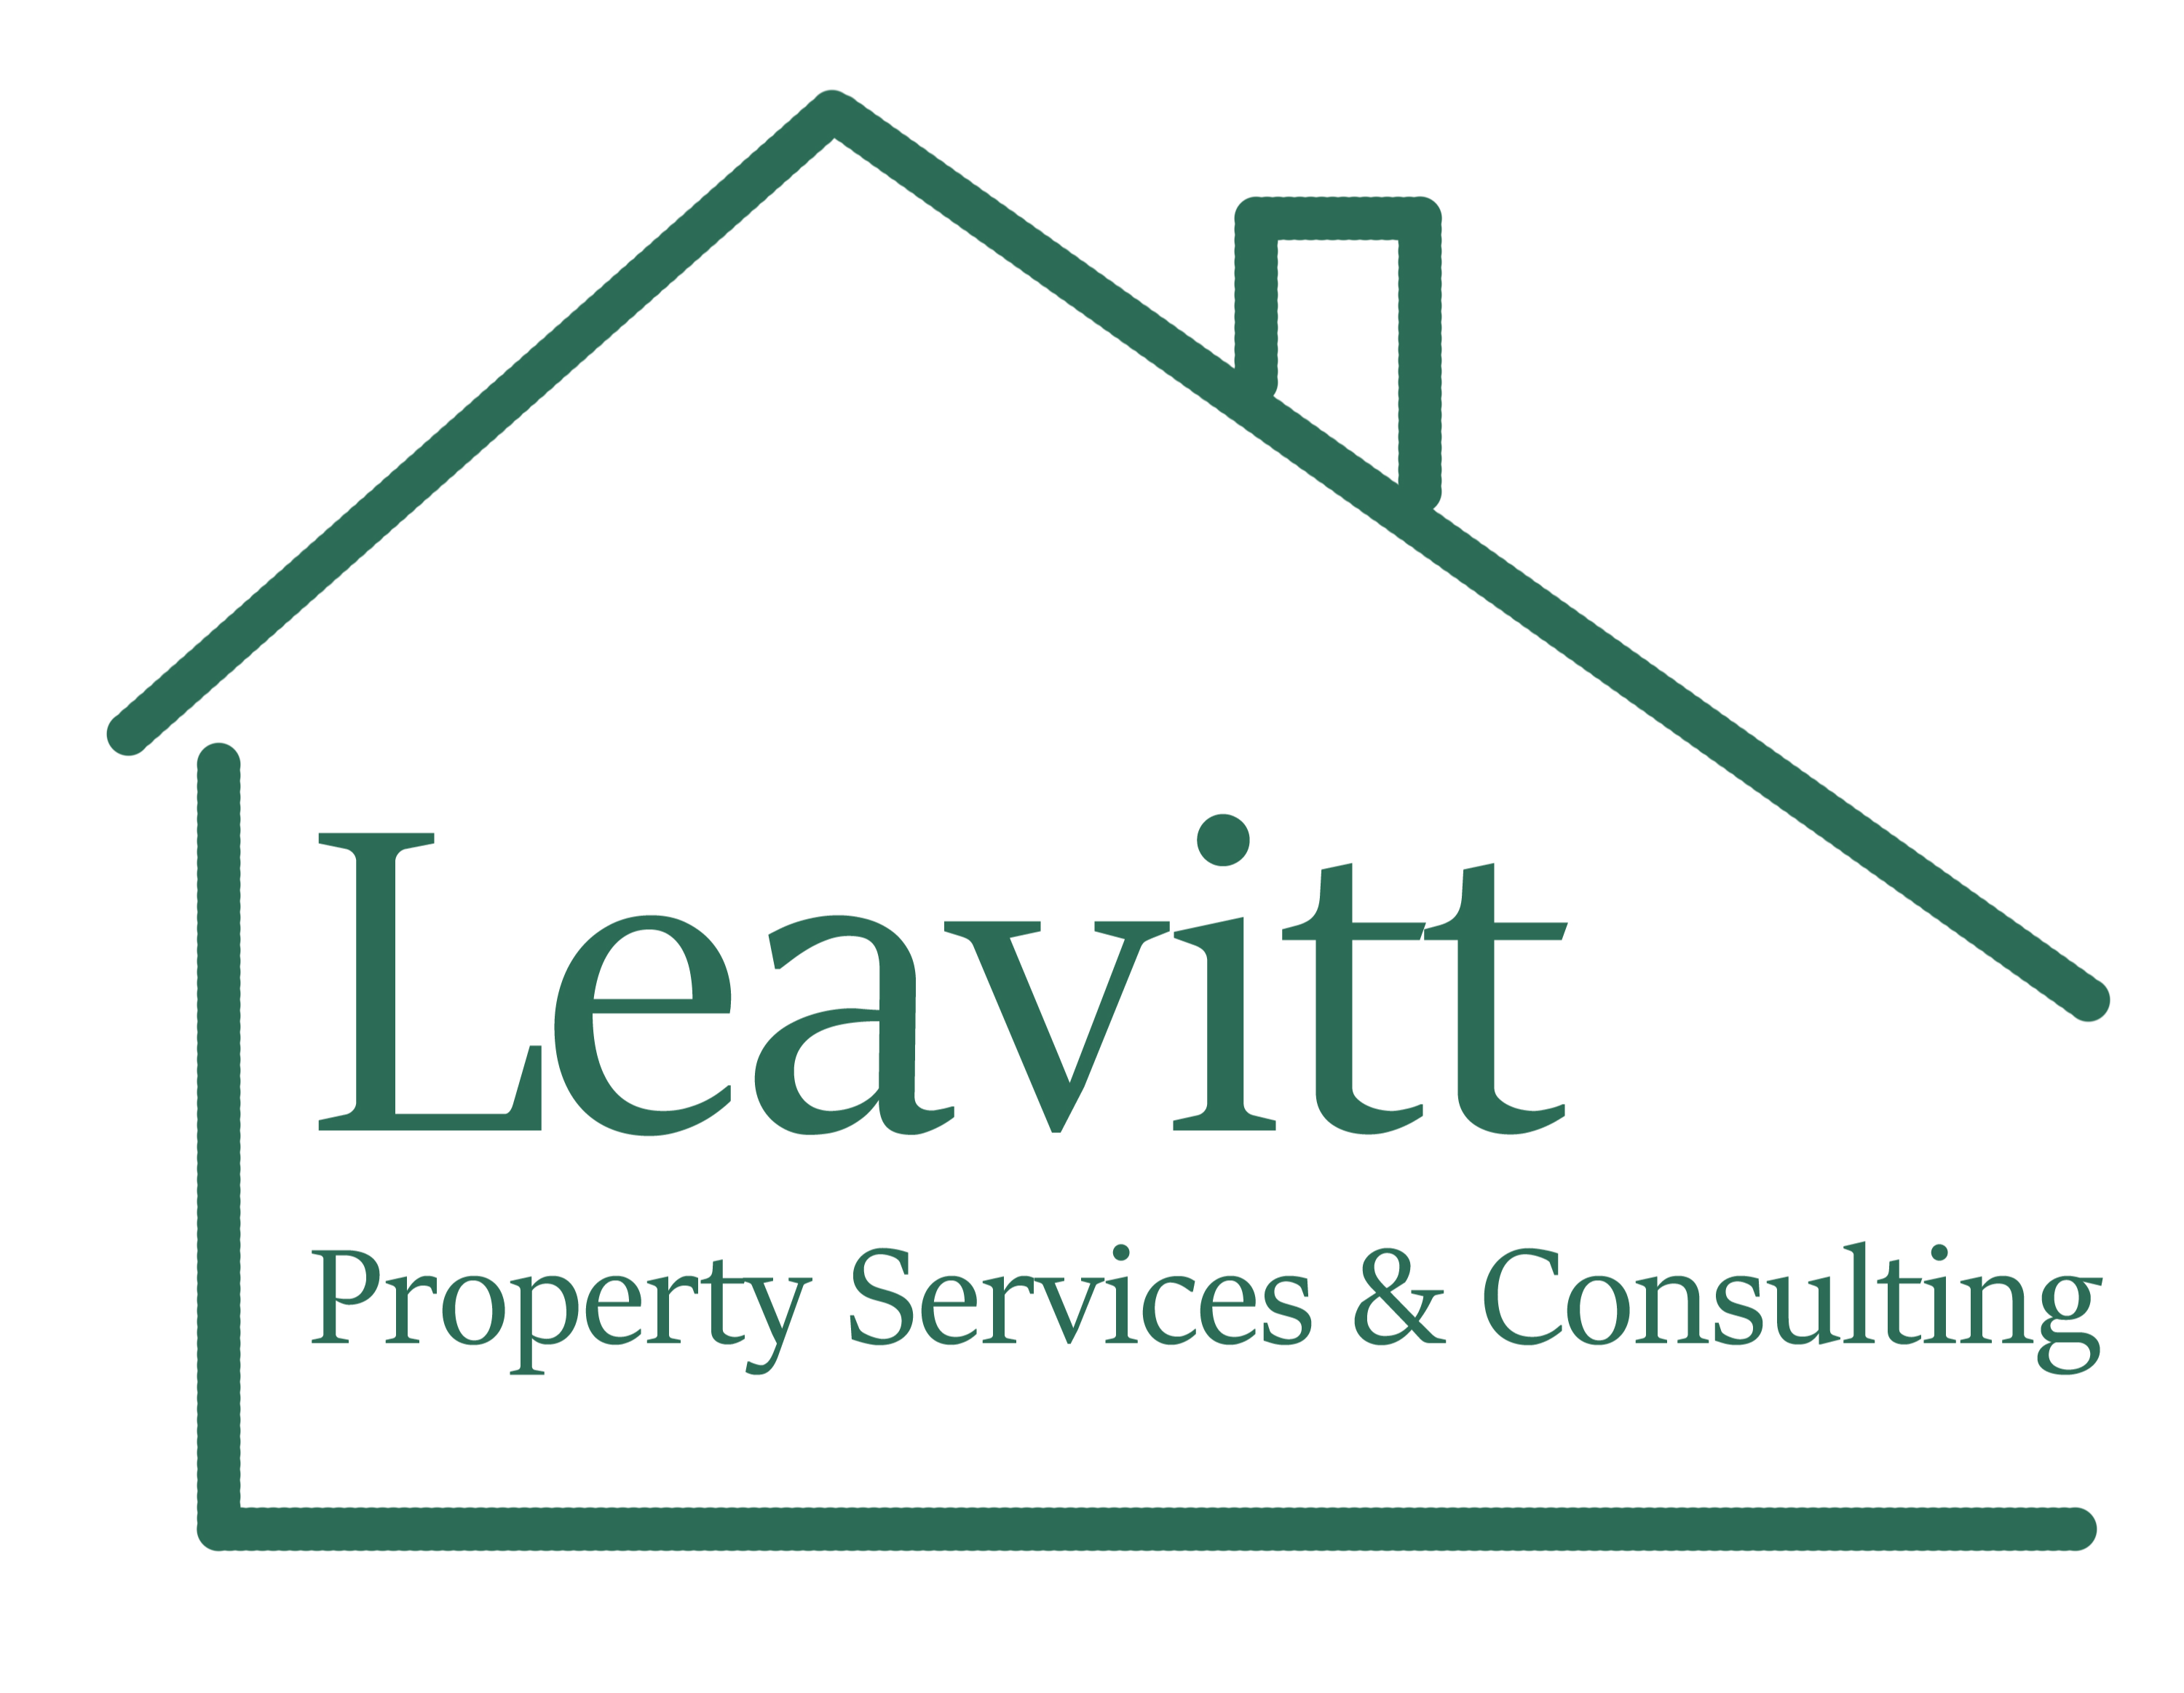 Leavitt Property Services & Consulting logo